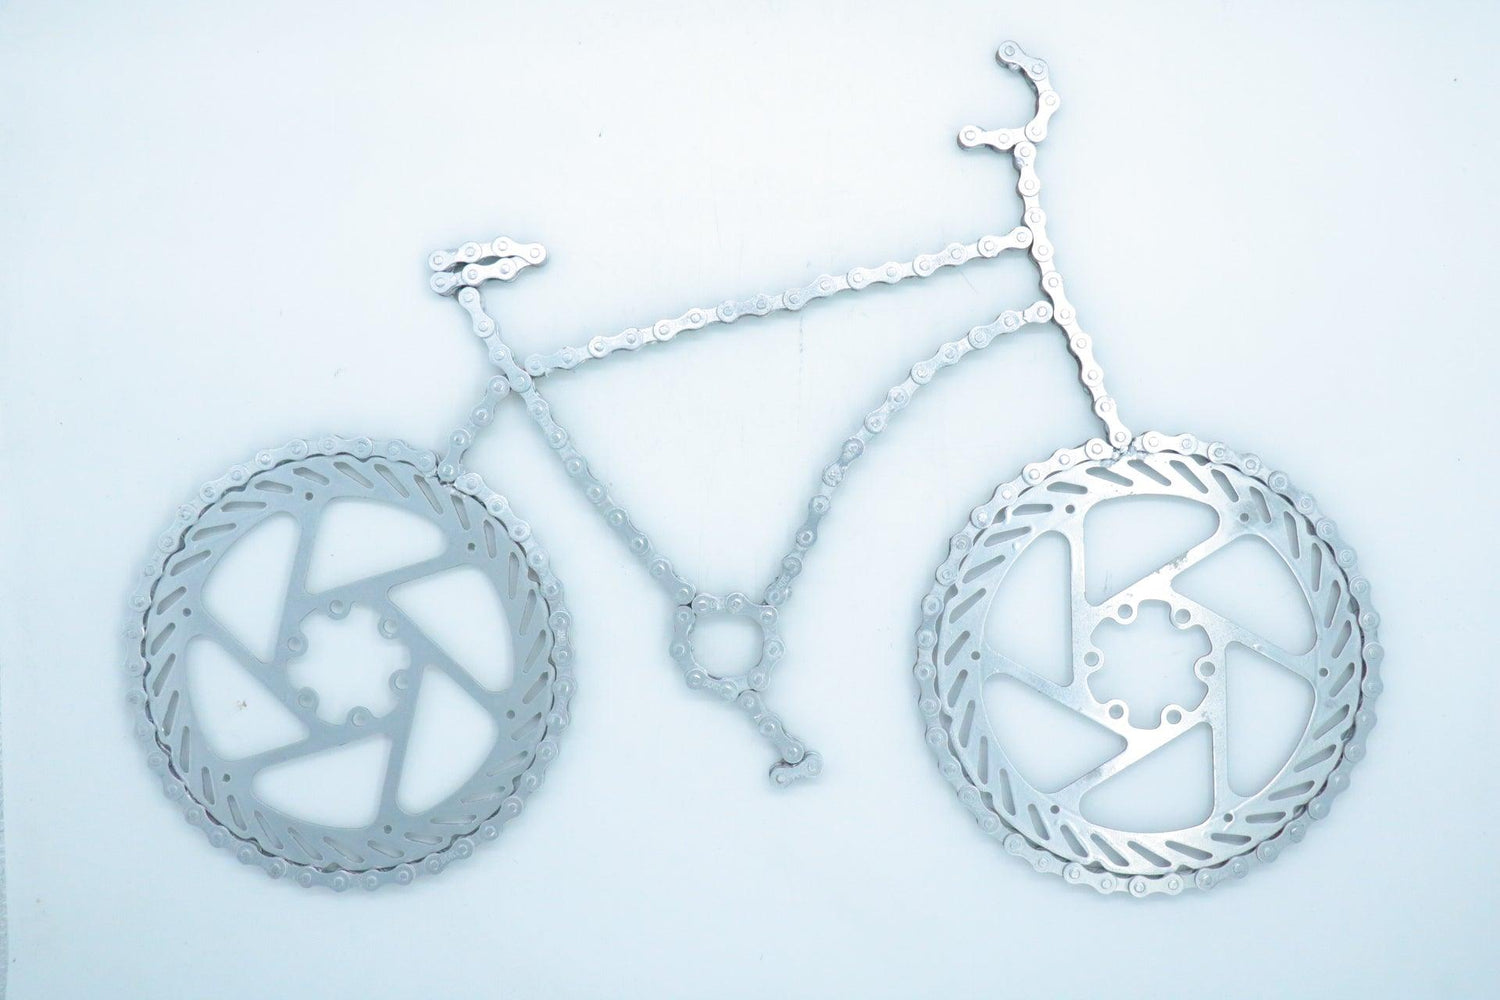 Bicycle Sculpture (Lance) | UNCHAINED by NIRIT LEVAV PACKER